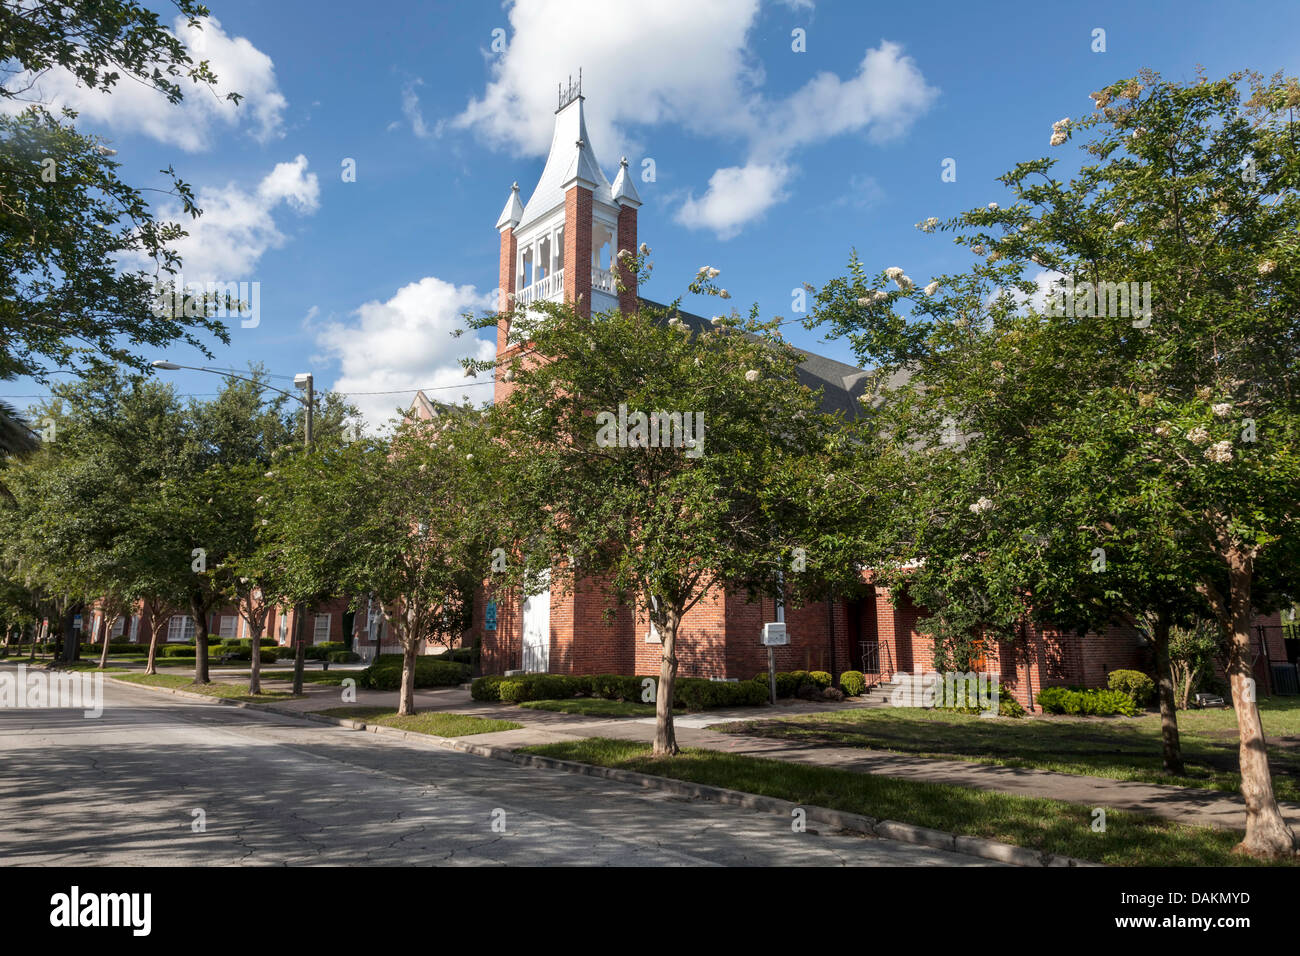 Street view of the historic United Methodist Church Fellowship Hall in Gainesville, Florida. Stock Photo